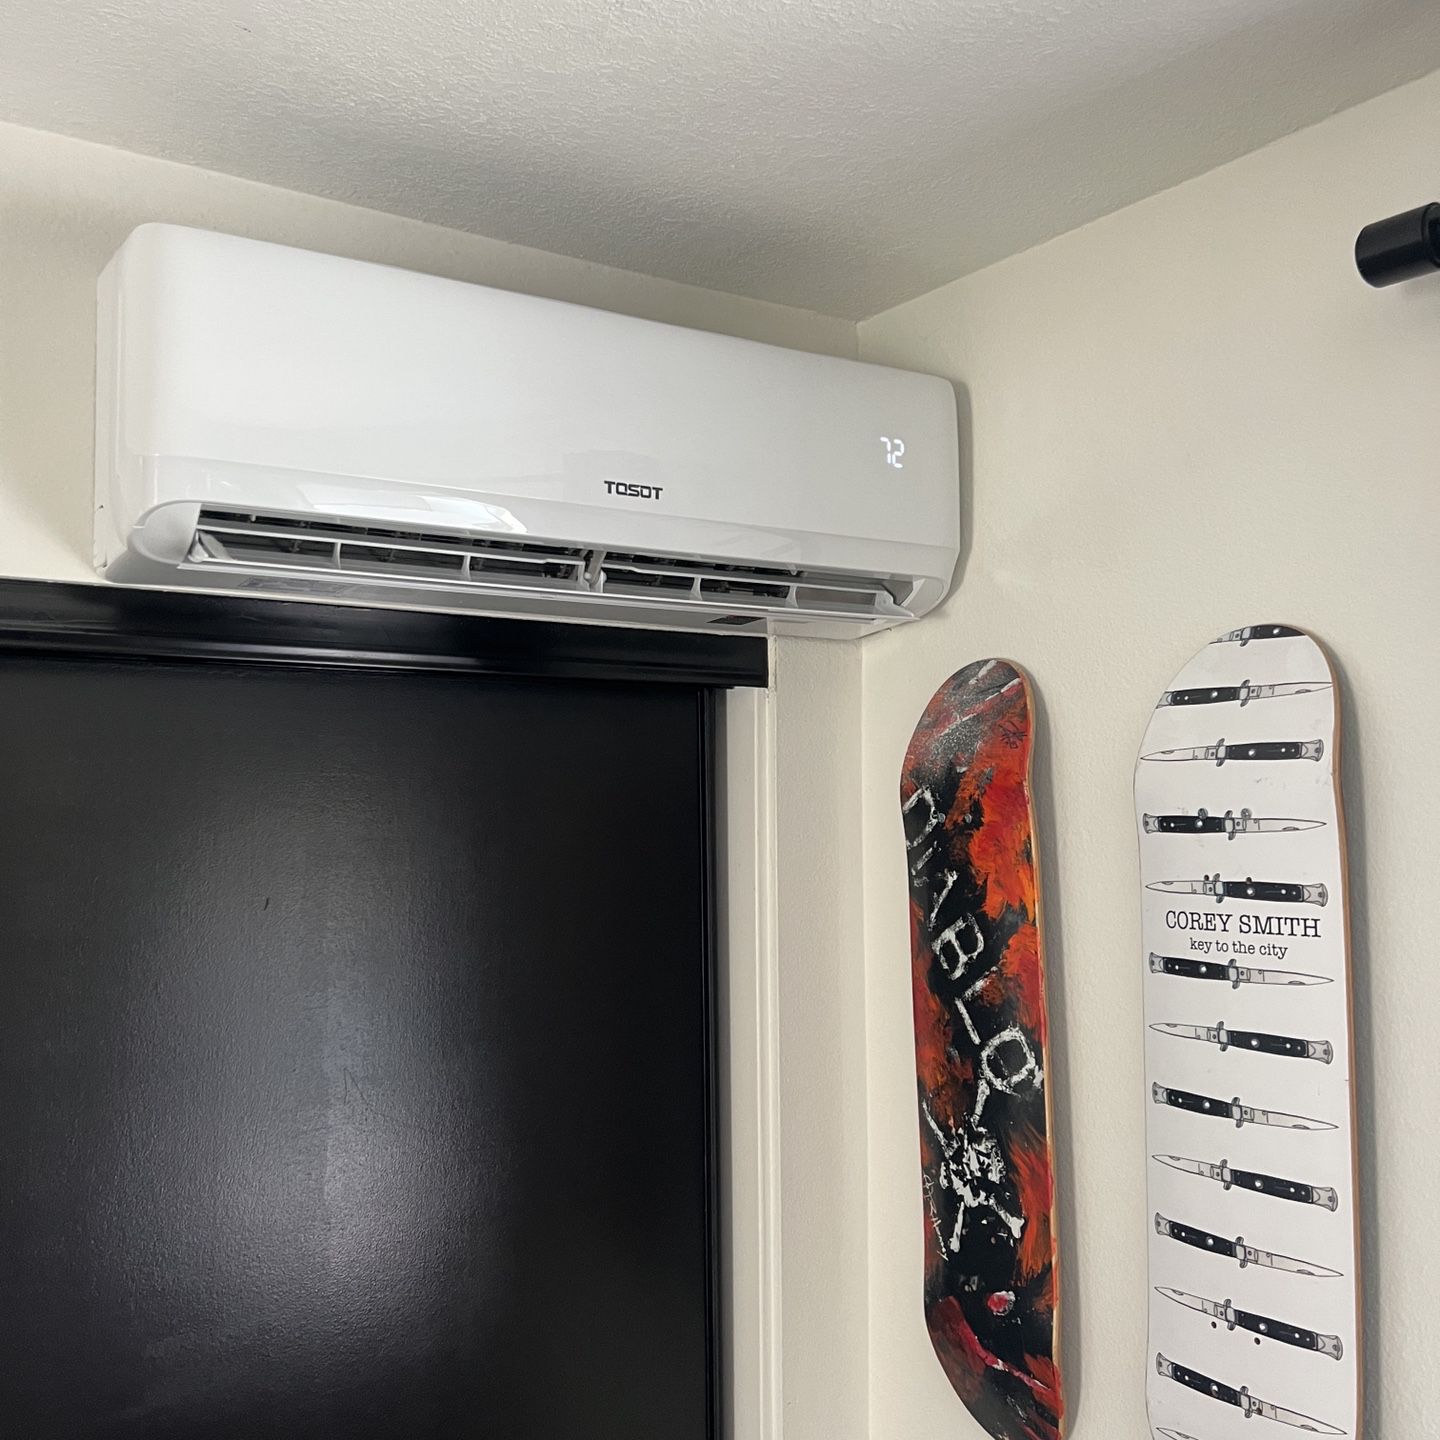 tosot gree 12000btu ac unit air conditioner and heater